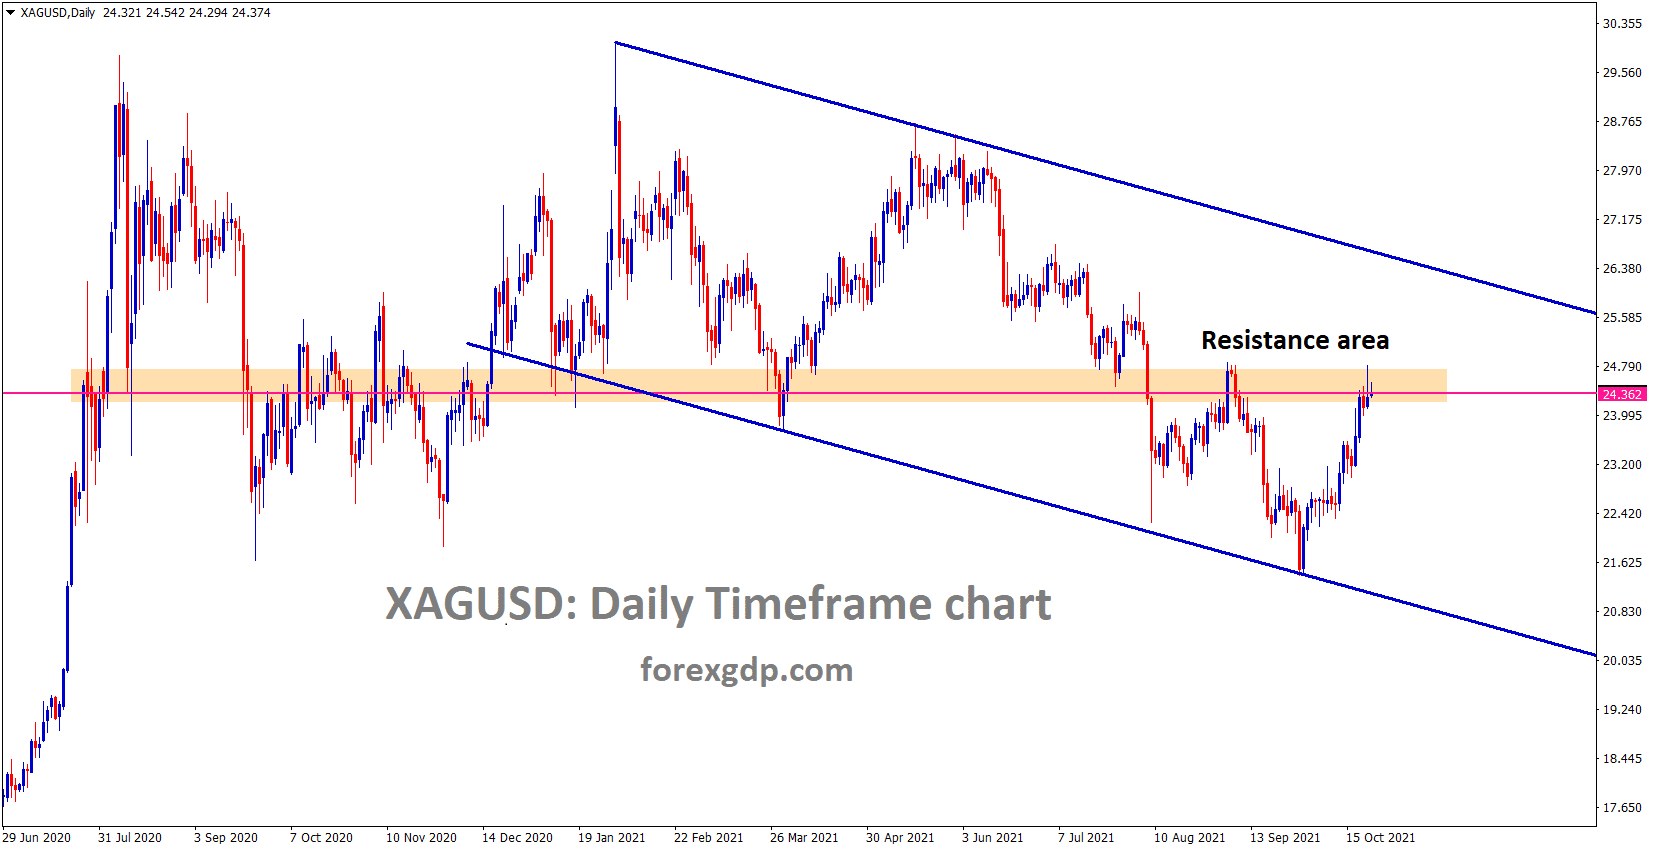 XAGUSD hits previous major resistance area and market standing on Previous high